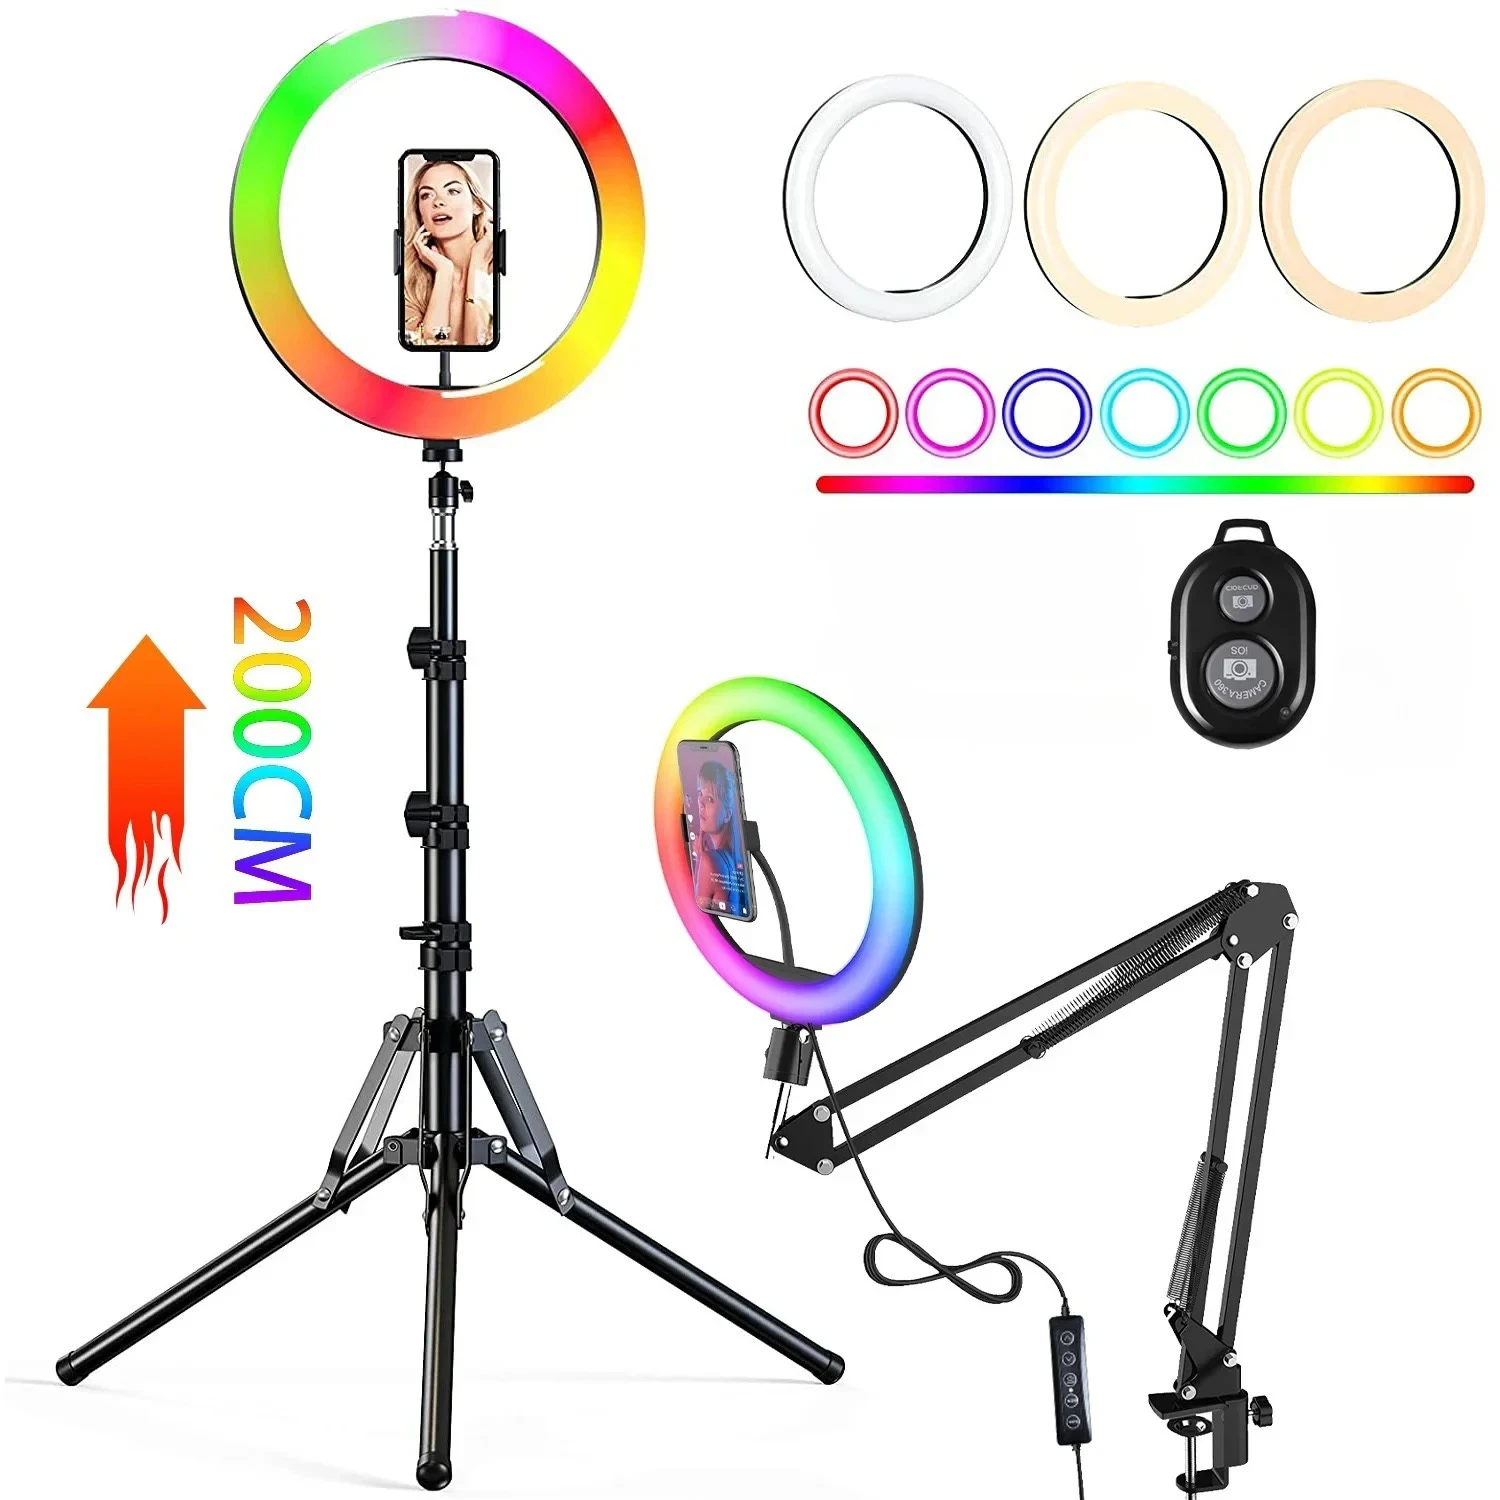 RGB Color Soft Ring Light With Desk Long Arm Tablet Tripod Photography Lighting Selfie RingLight Circle Lamp Phone Holder Stand